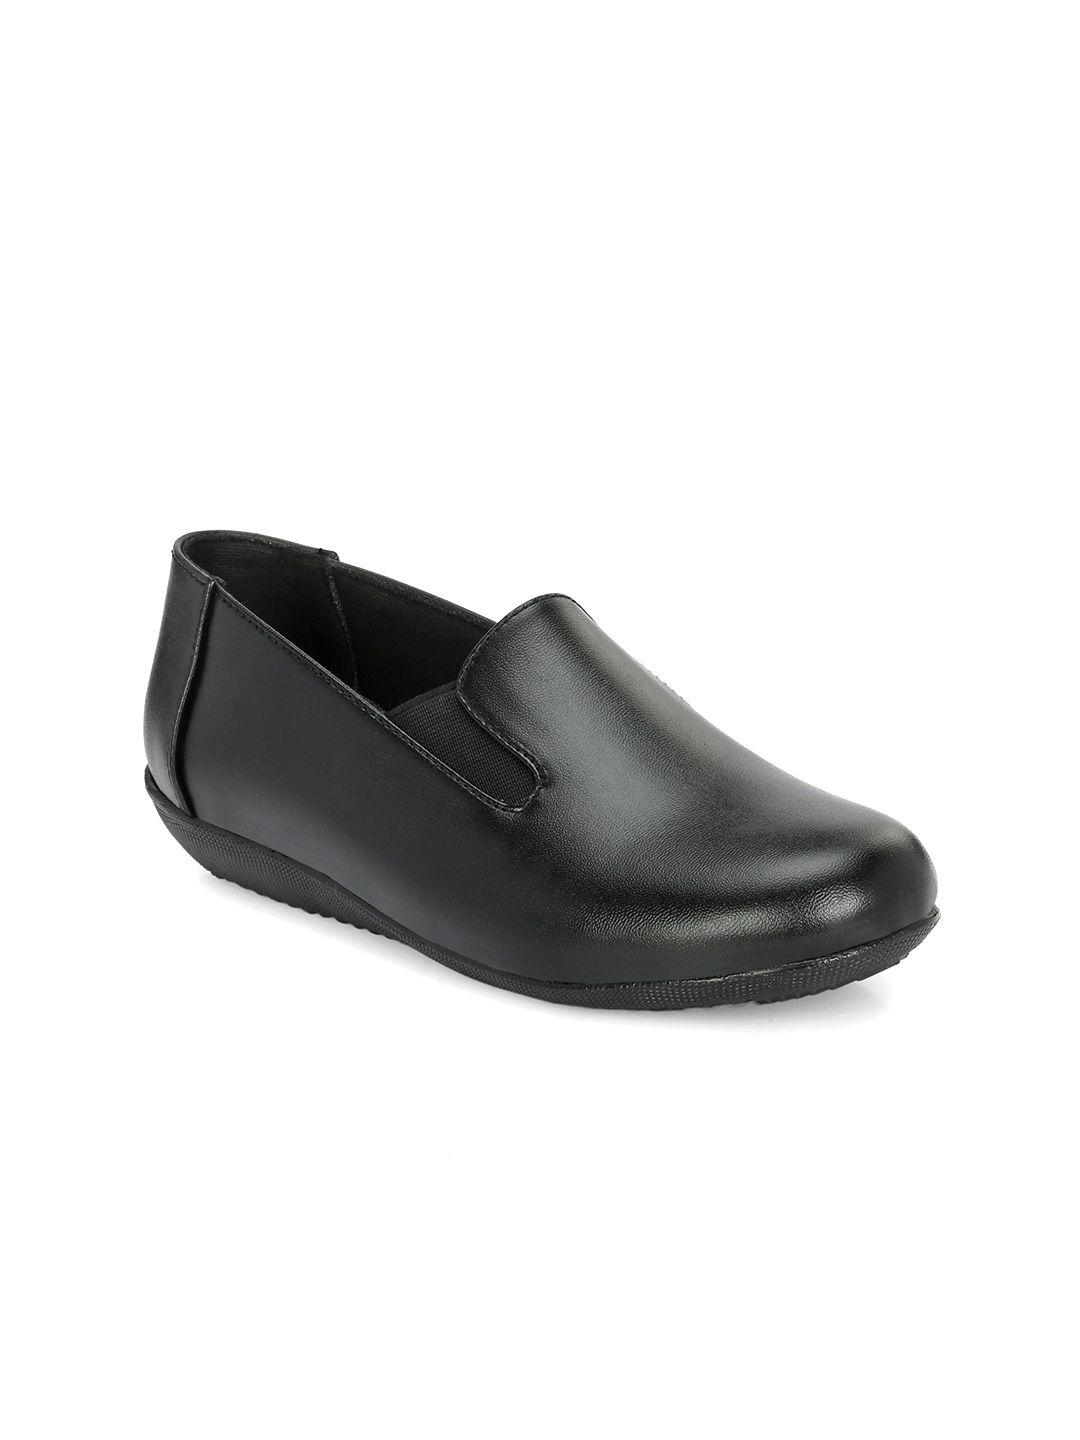 eego italy women round toe formal slip-on shoes